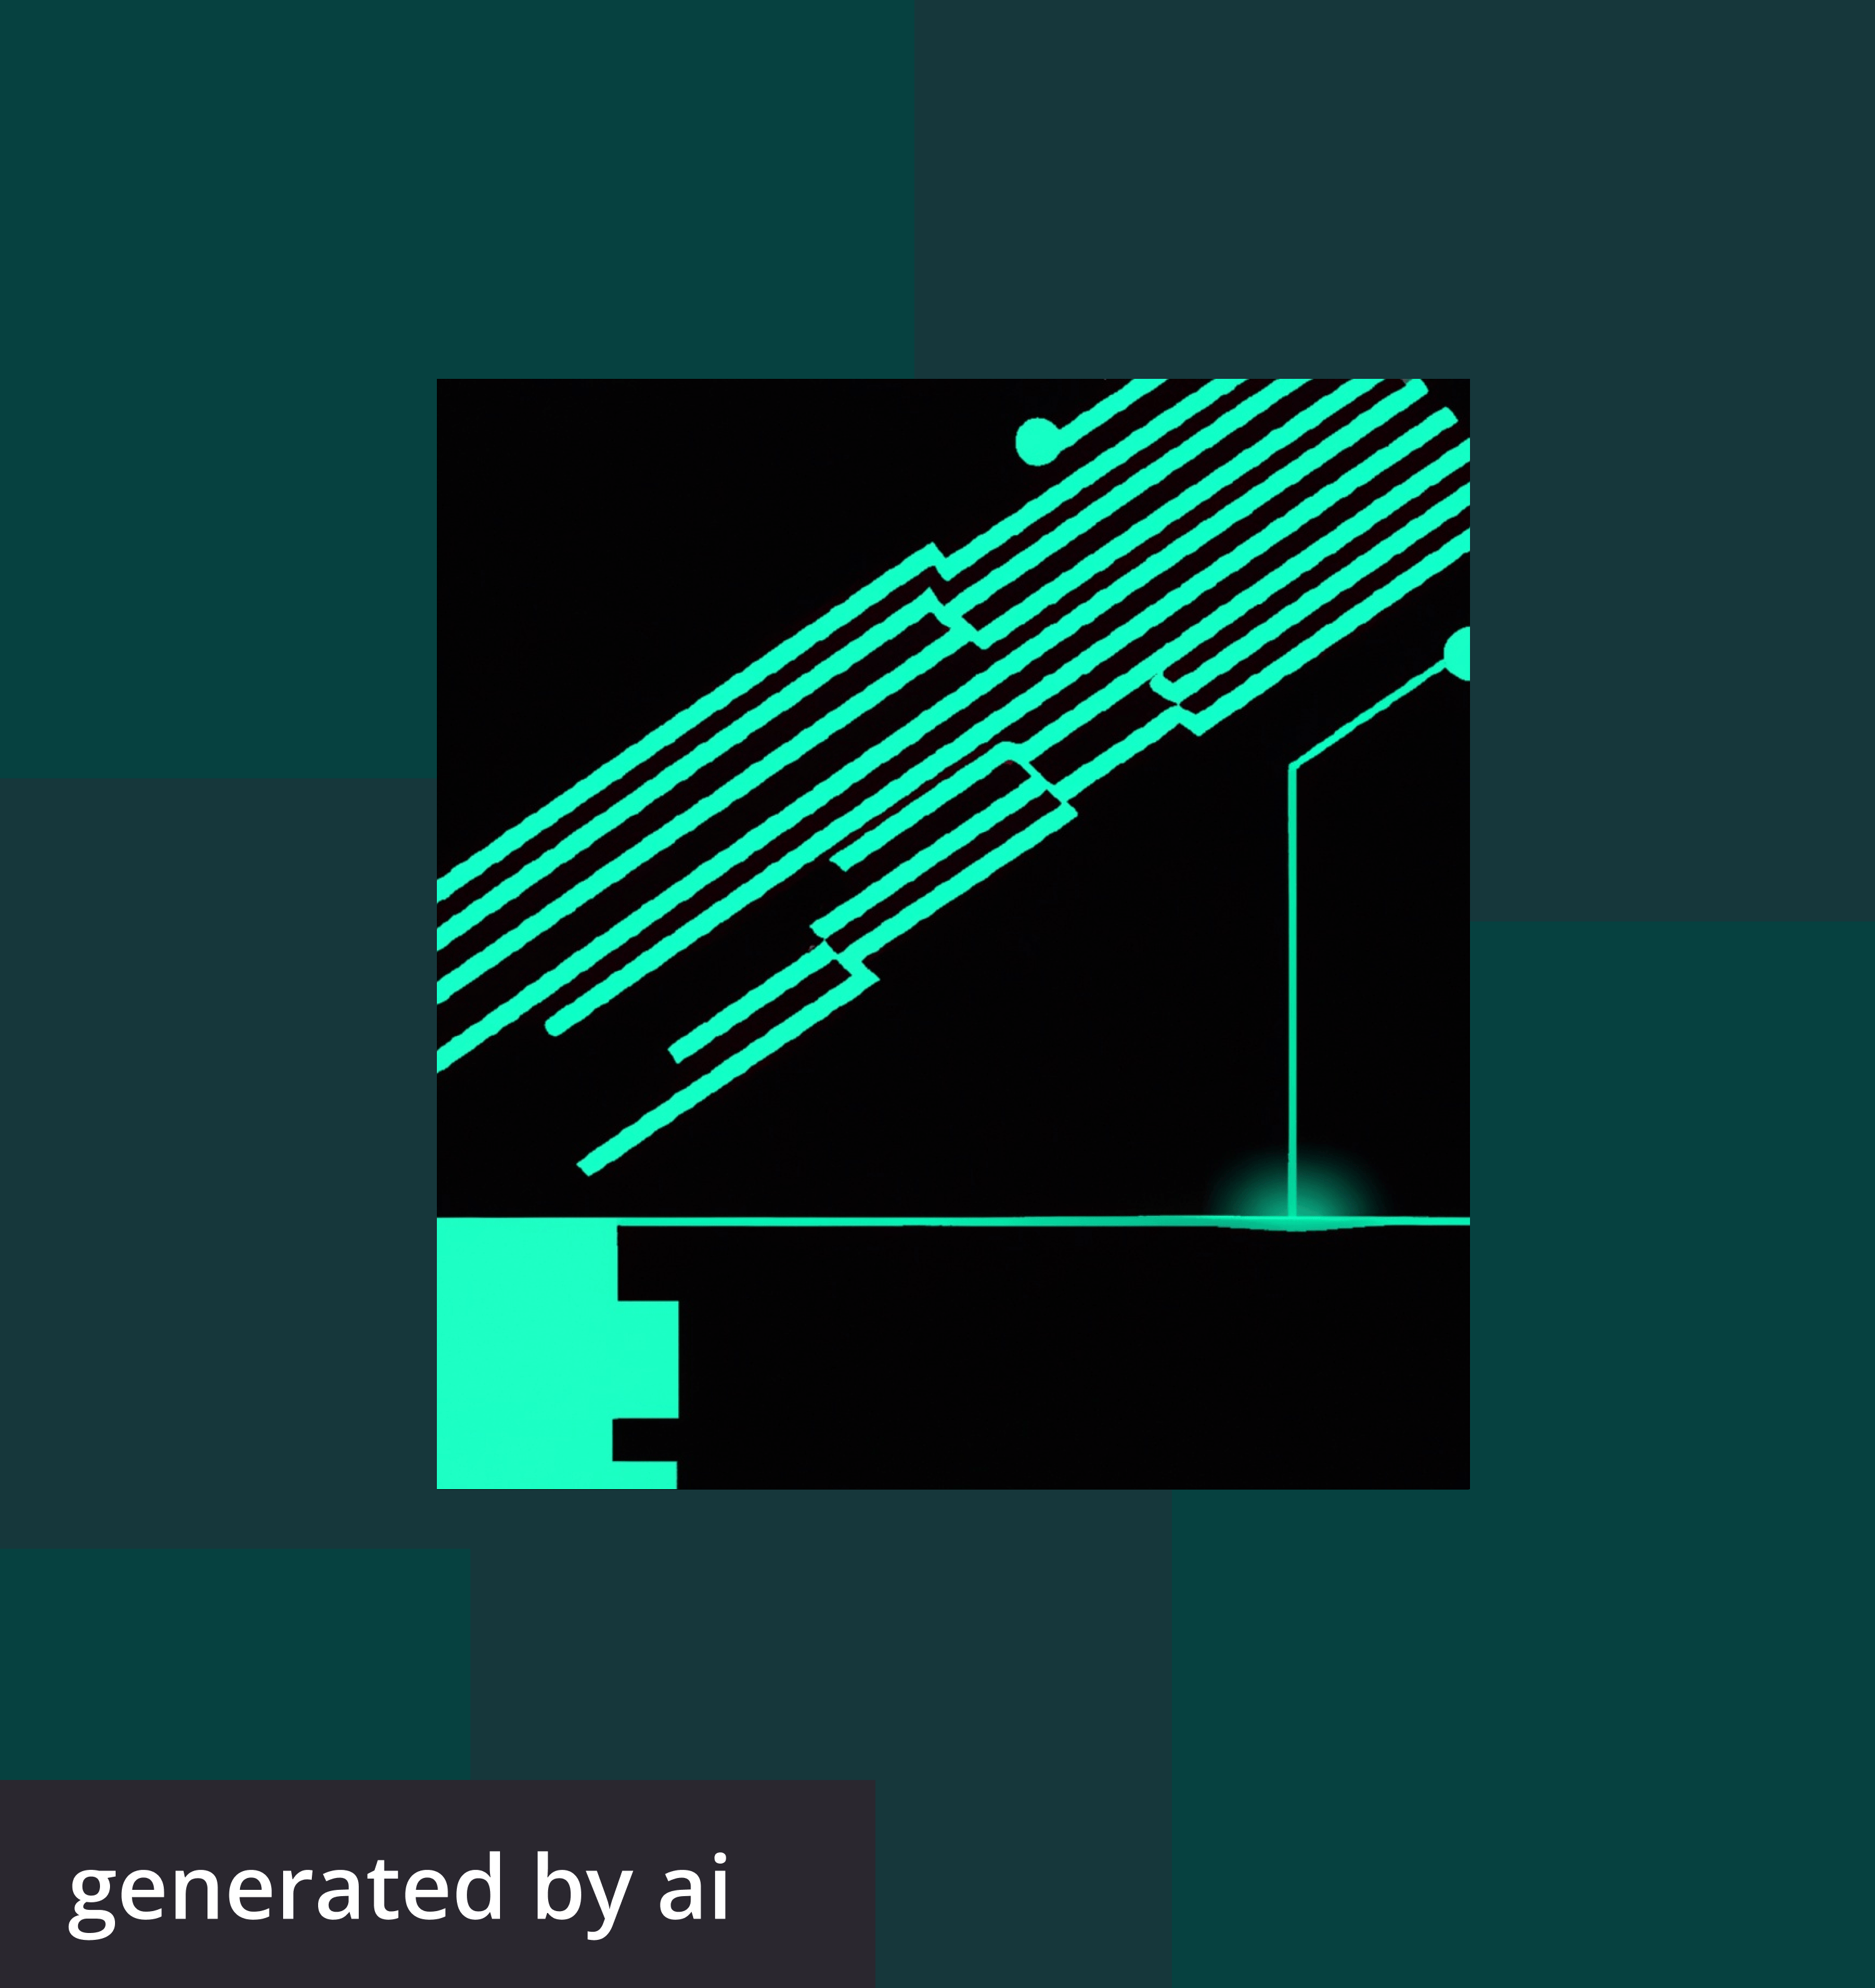 Abstract, futuristic photo generated by AI